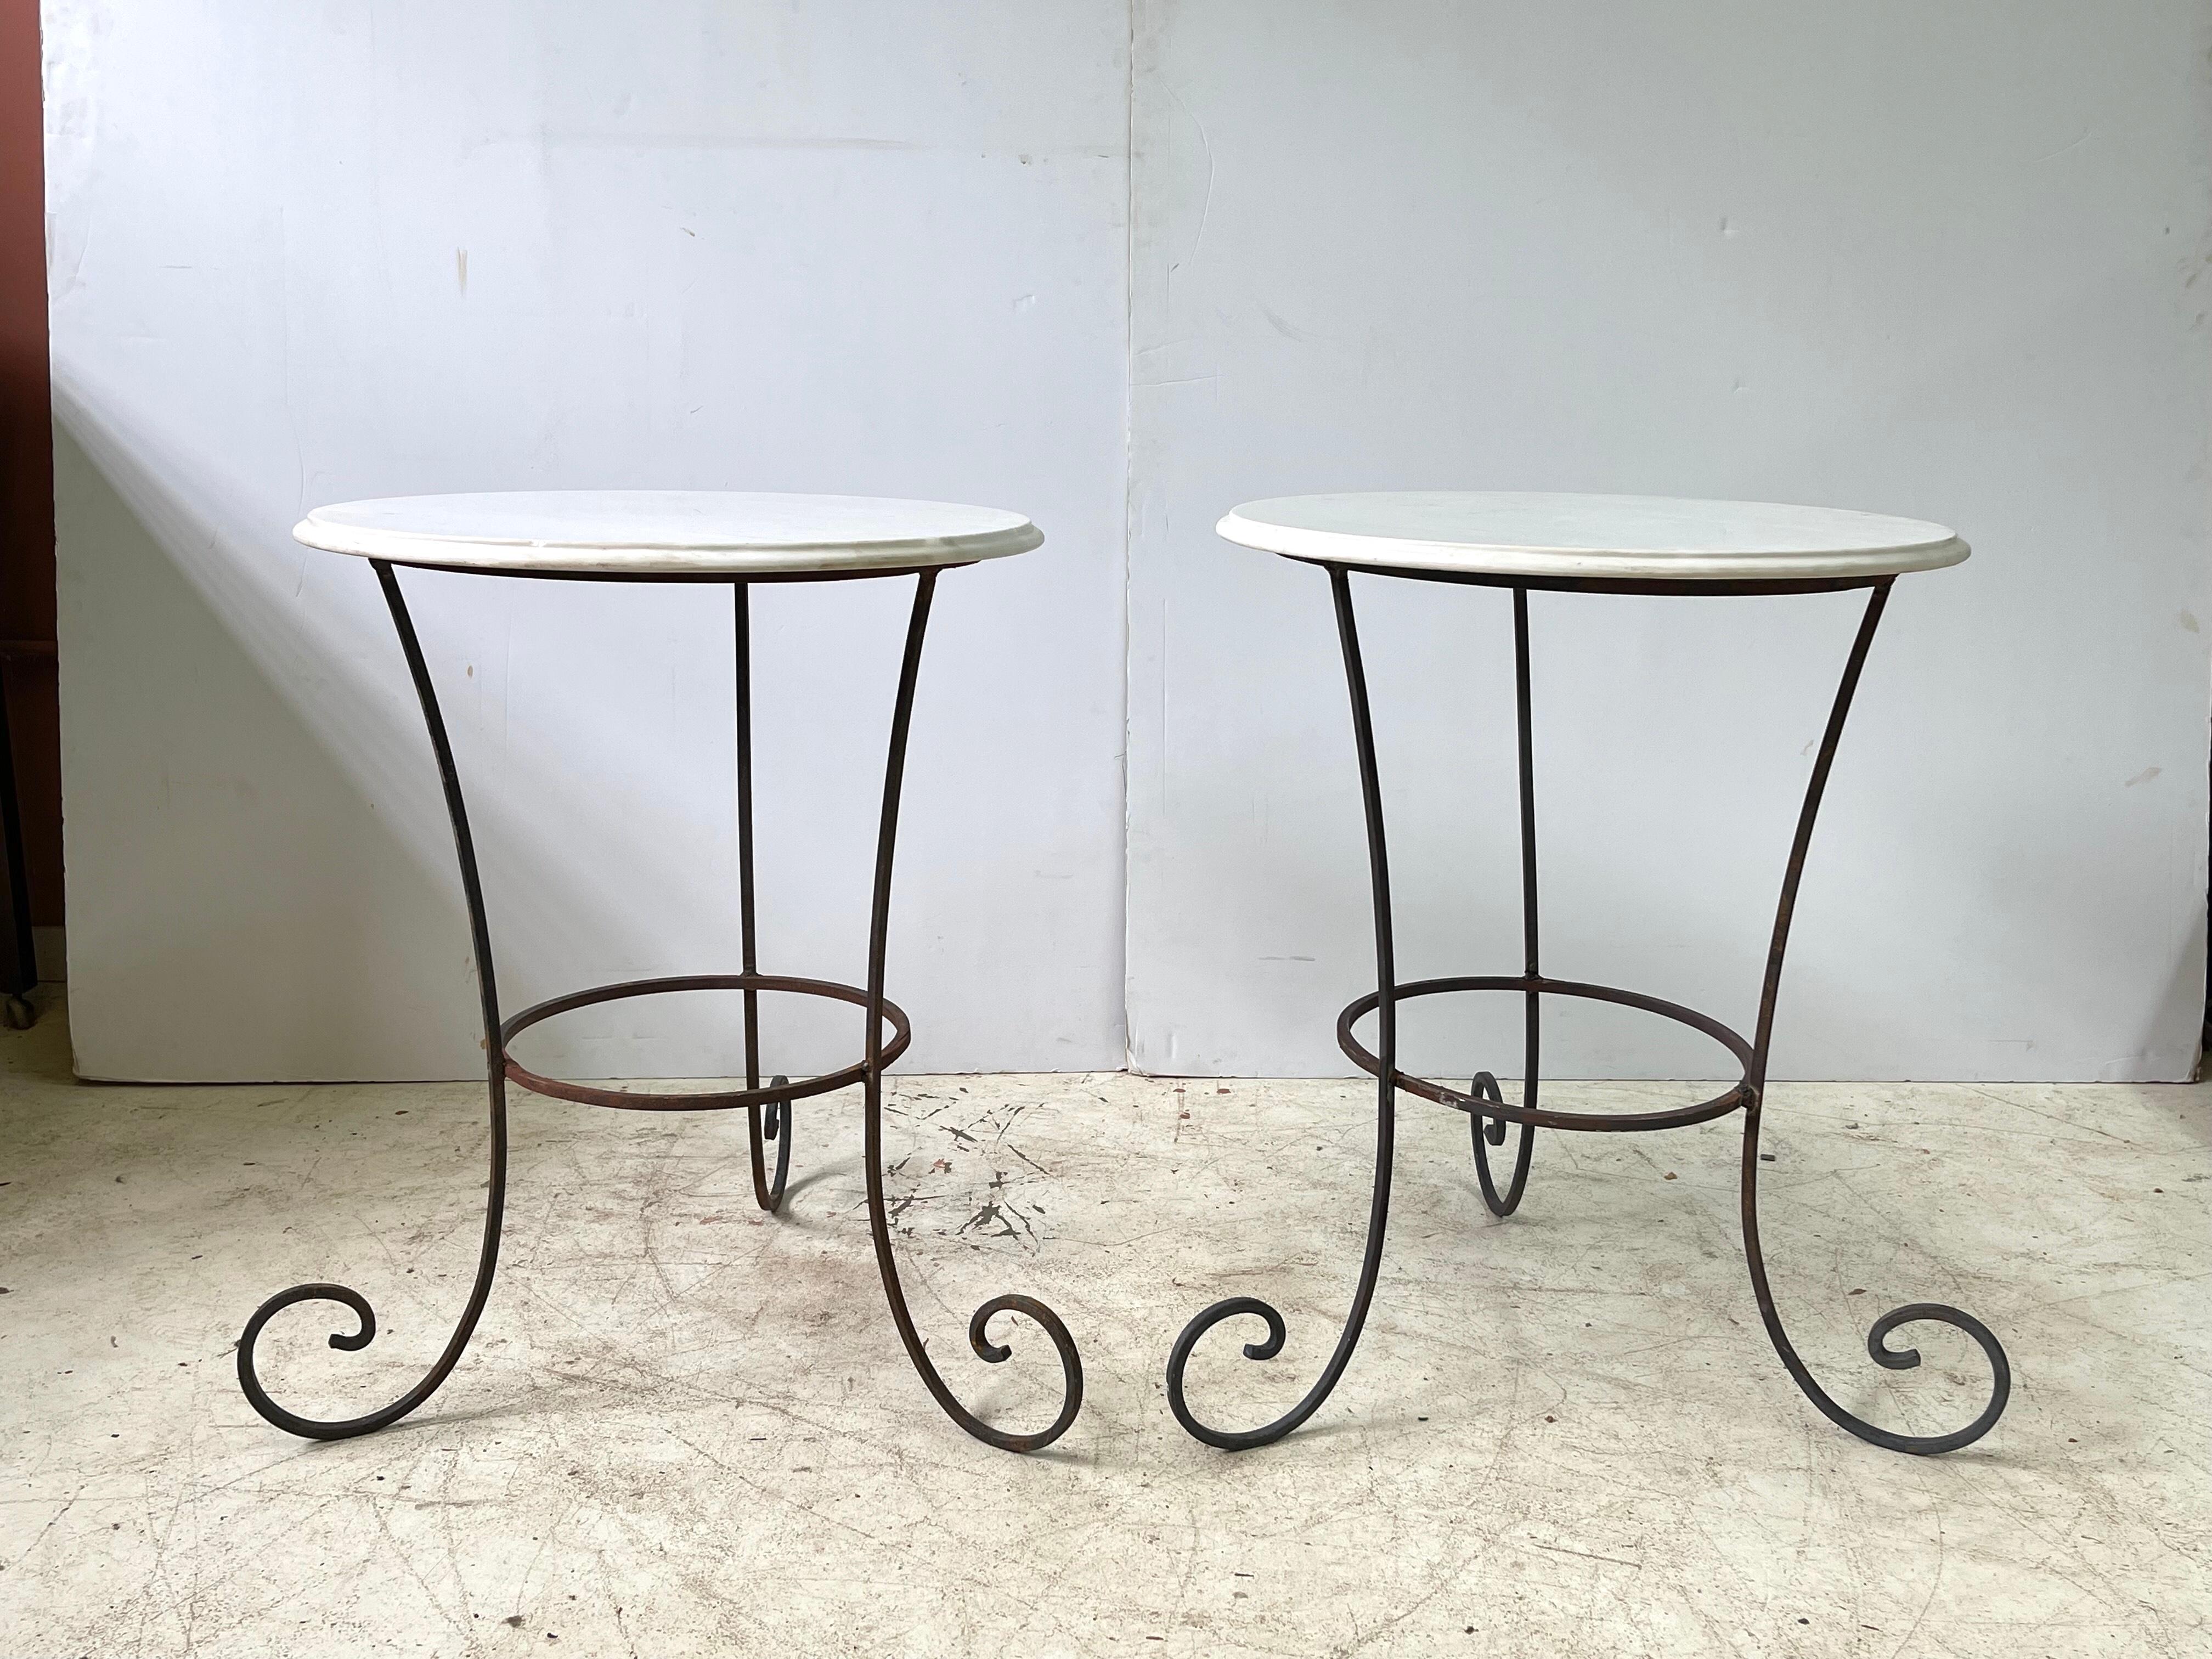 Fabulous pair of 20th Century French scrolling gueridon-style side tables of hand forged iron and having round white marble tops. The table tops each measure 21.5” in diameter, the bases 25” in diameter at the widest point, and their height is